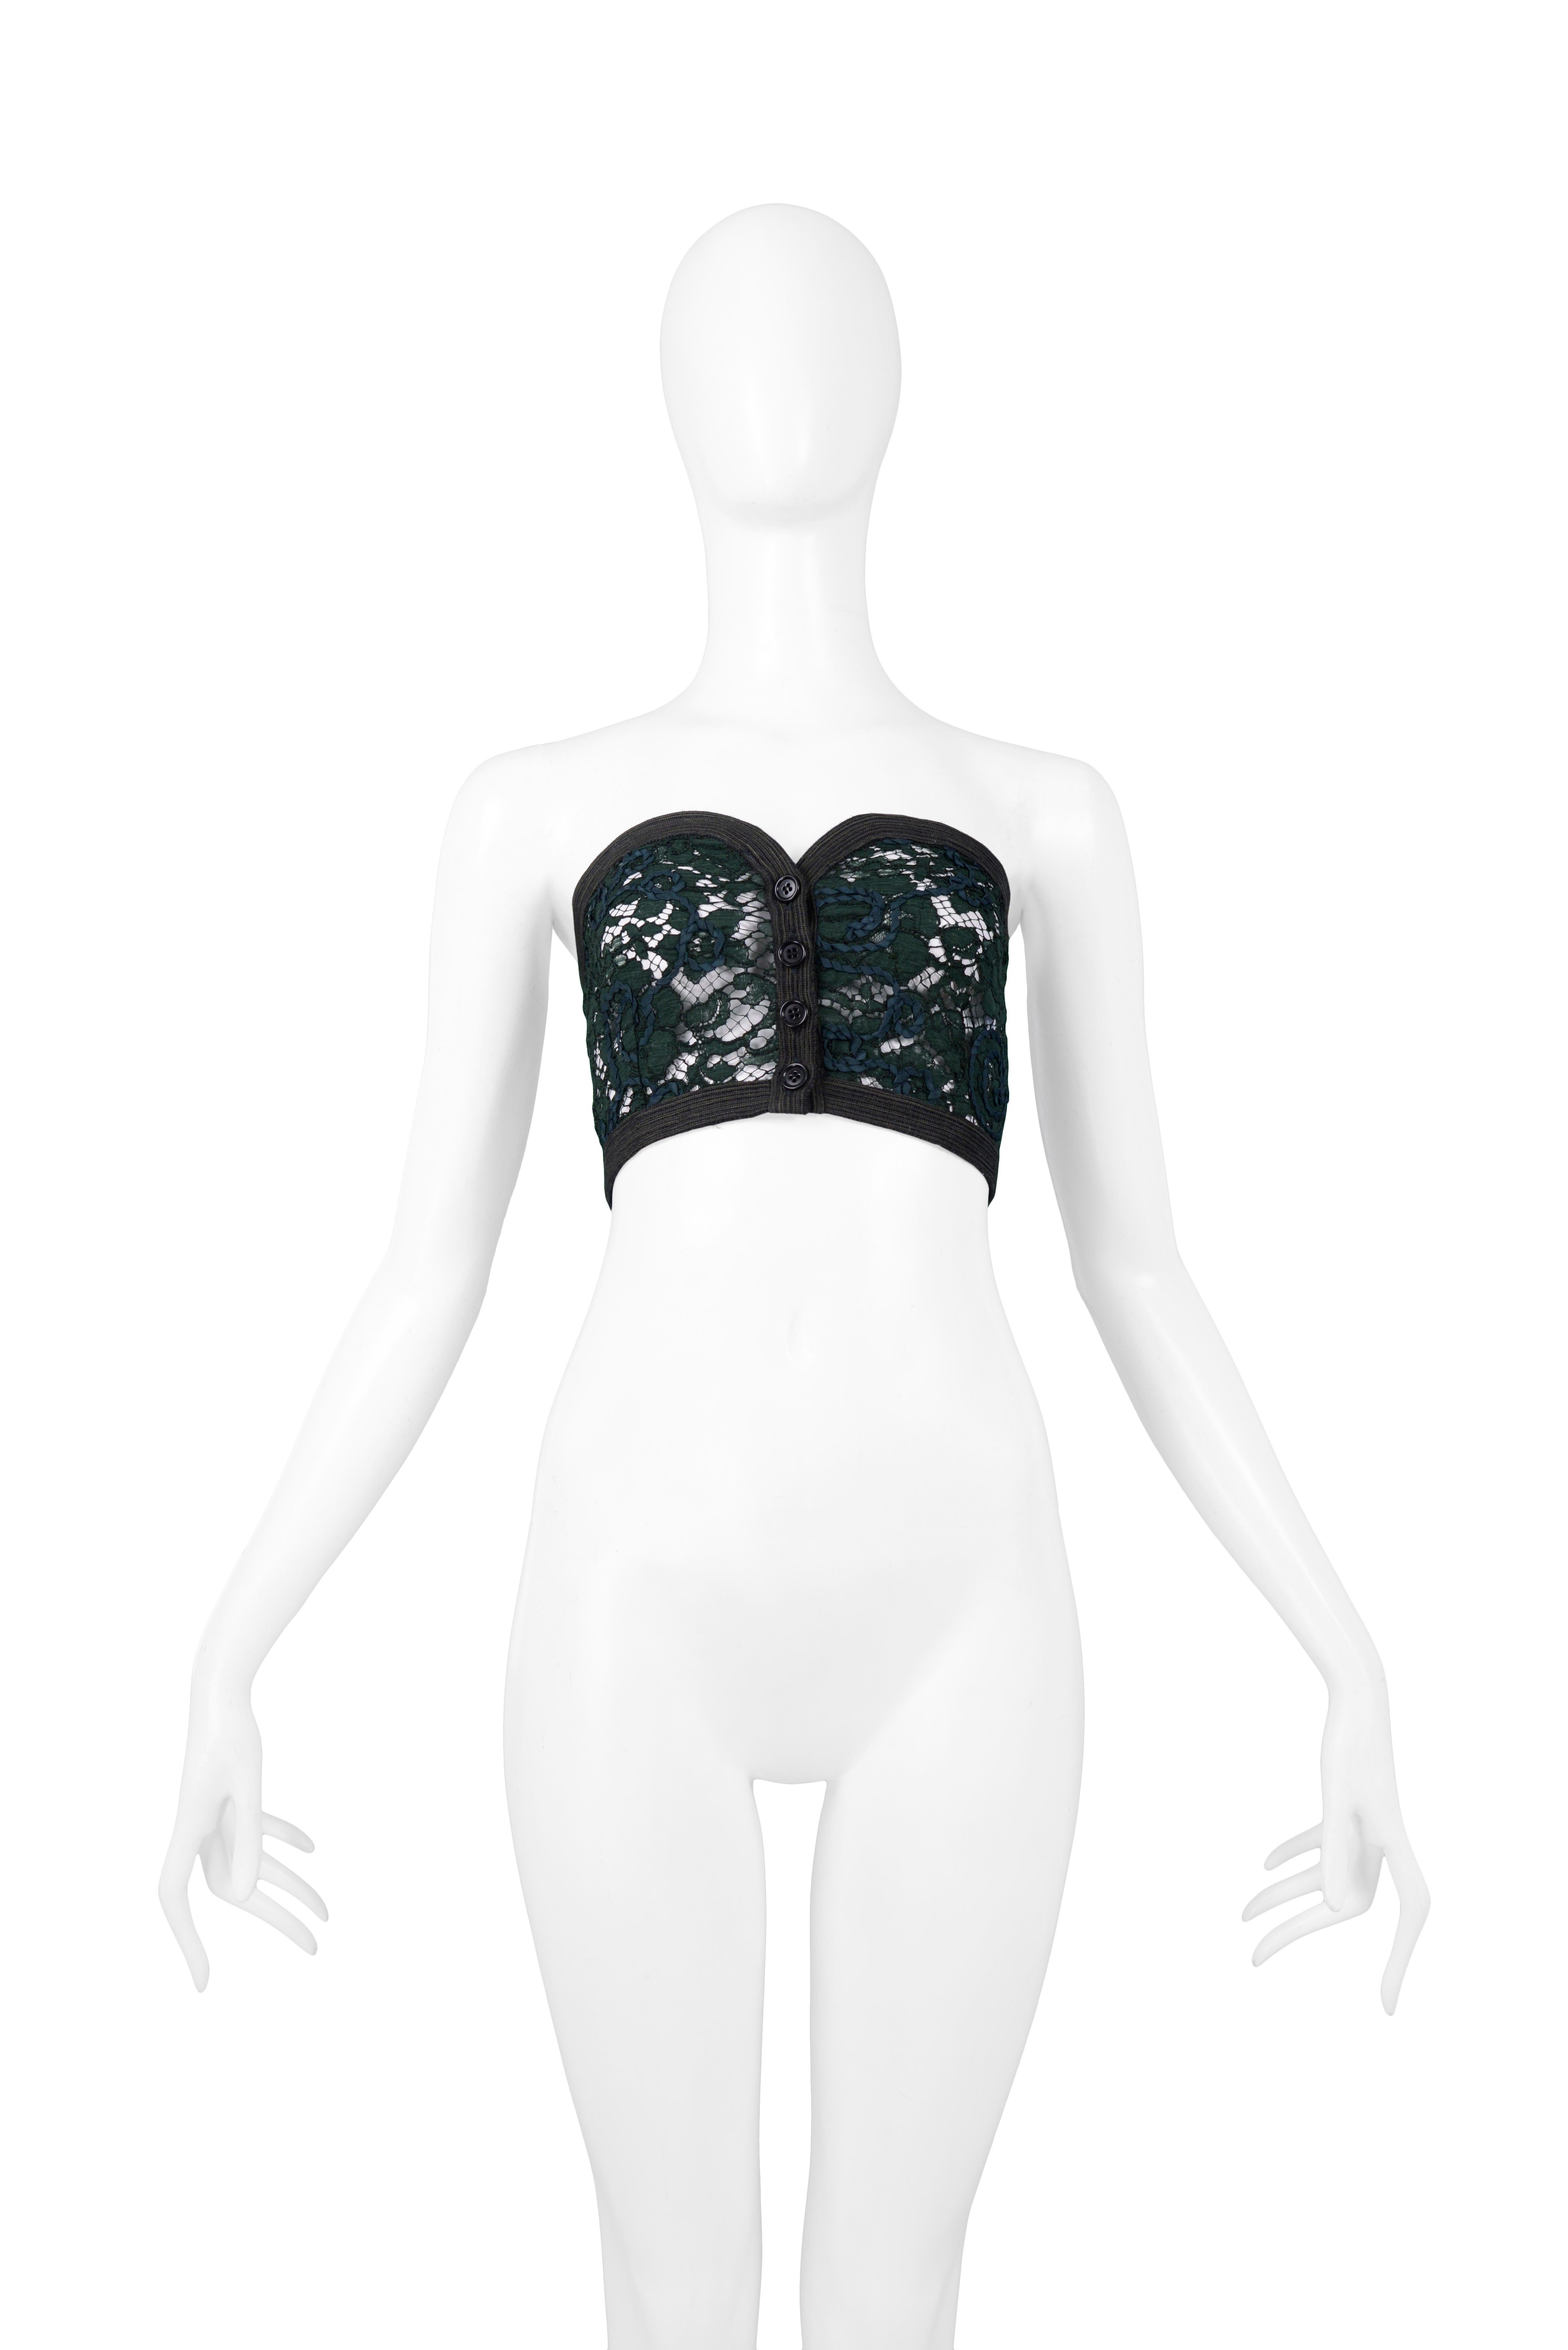 Resurrection Vintage is excited to offer a vintage Romeo Gigli dark green cotton lace crop top featuring a bustier fit, ribbon trim, and 4 button front closure. From the 1990 Collection.

Romeo Gigli, Italy
Size 42
Lace
1990 Collection 
Excellent